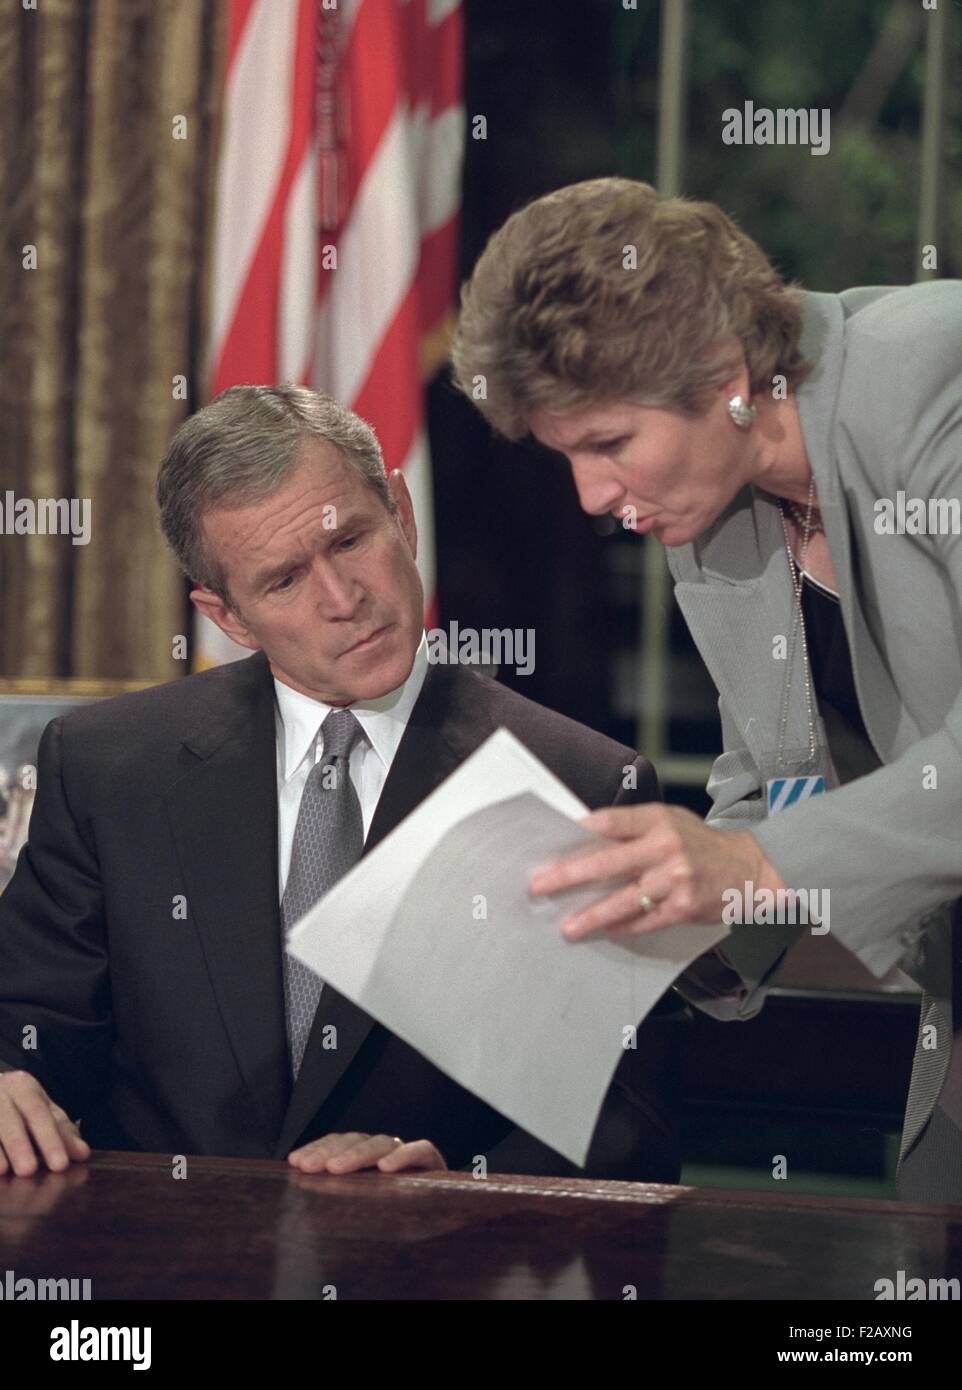 President George W. Bush reviews notes with Karen Hughes before speaking from the Oval Office. He spoke 12 hours after the 9-11 Stock Photo